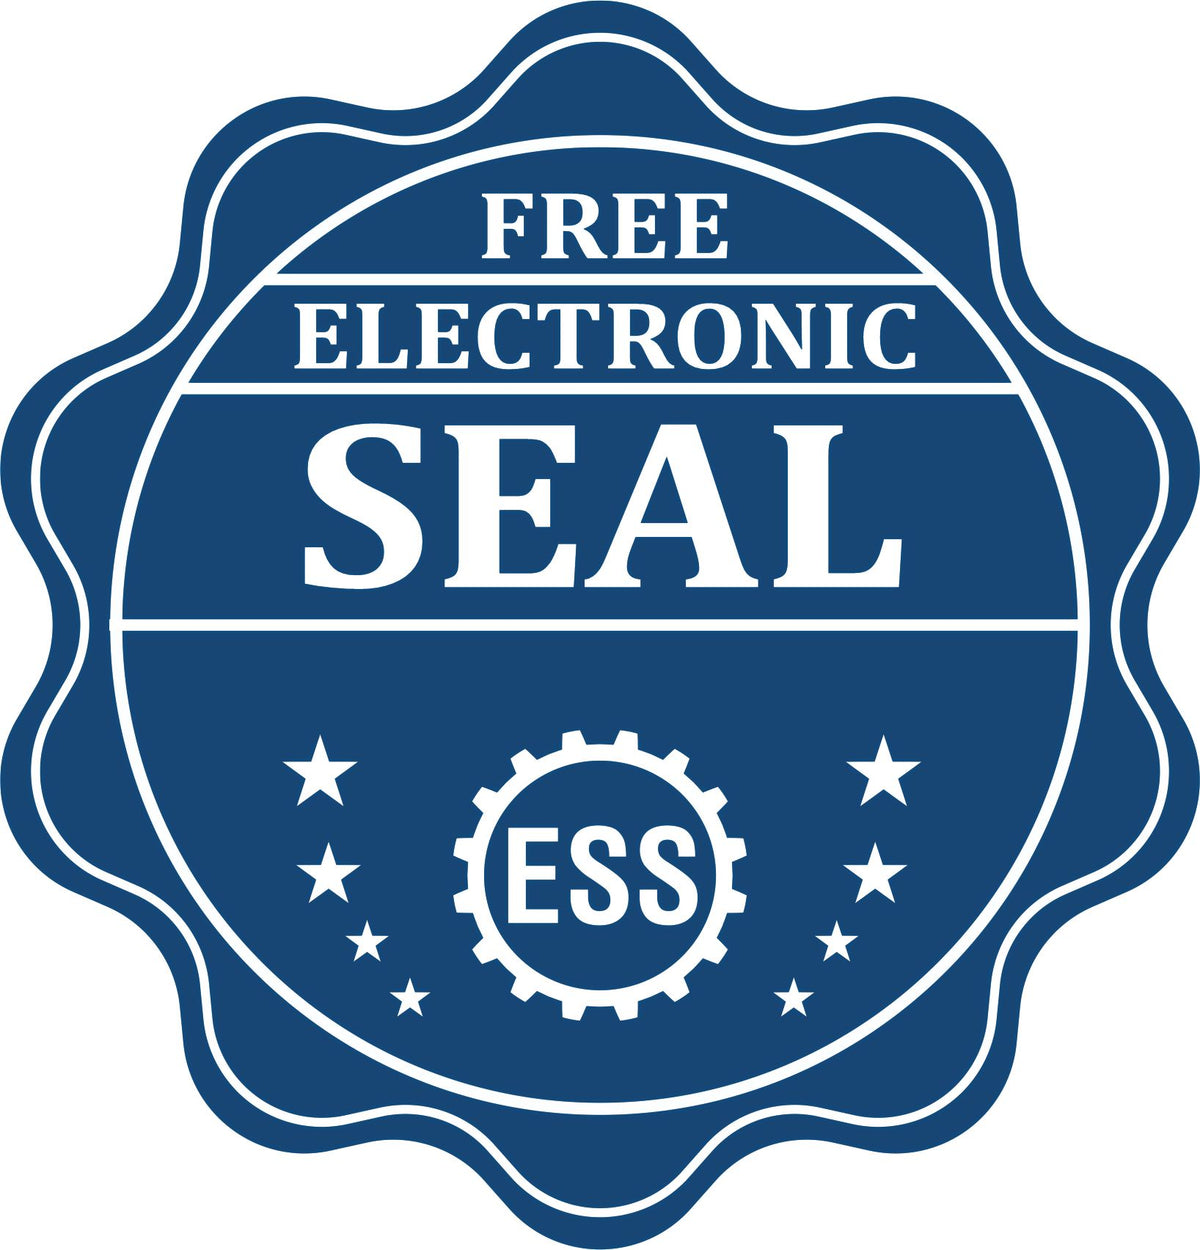 A badge showing a free electronic seal for the Heavy Duty Cast Iron Nebraska Geologist Seal Embosser with stars and the ESS gear on the emblem.